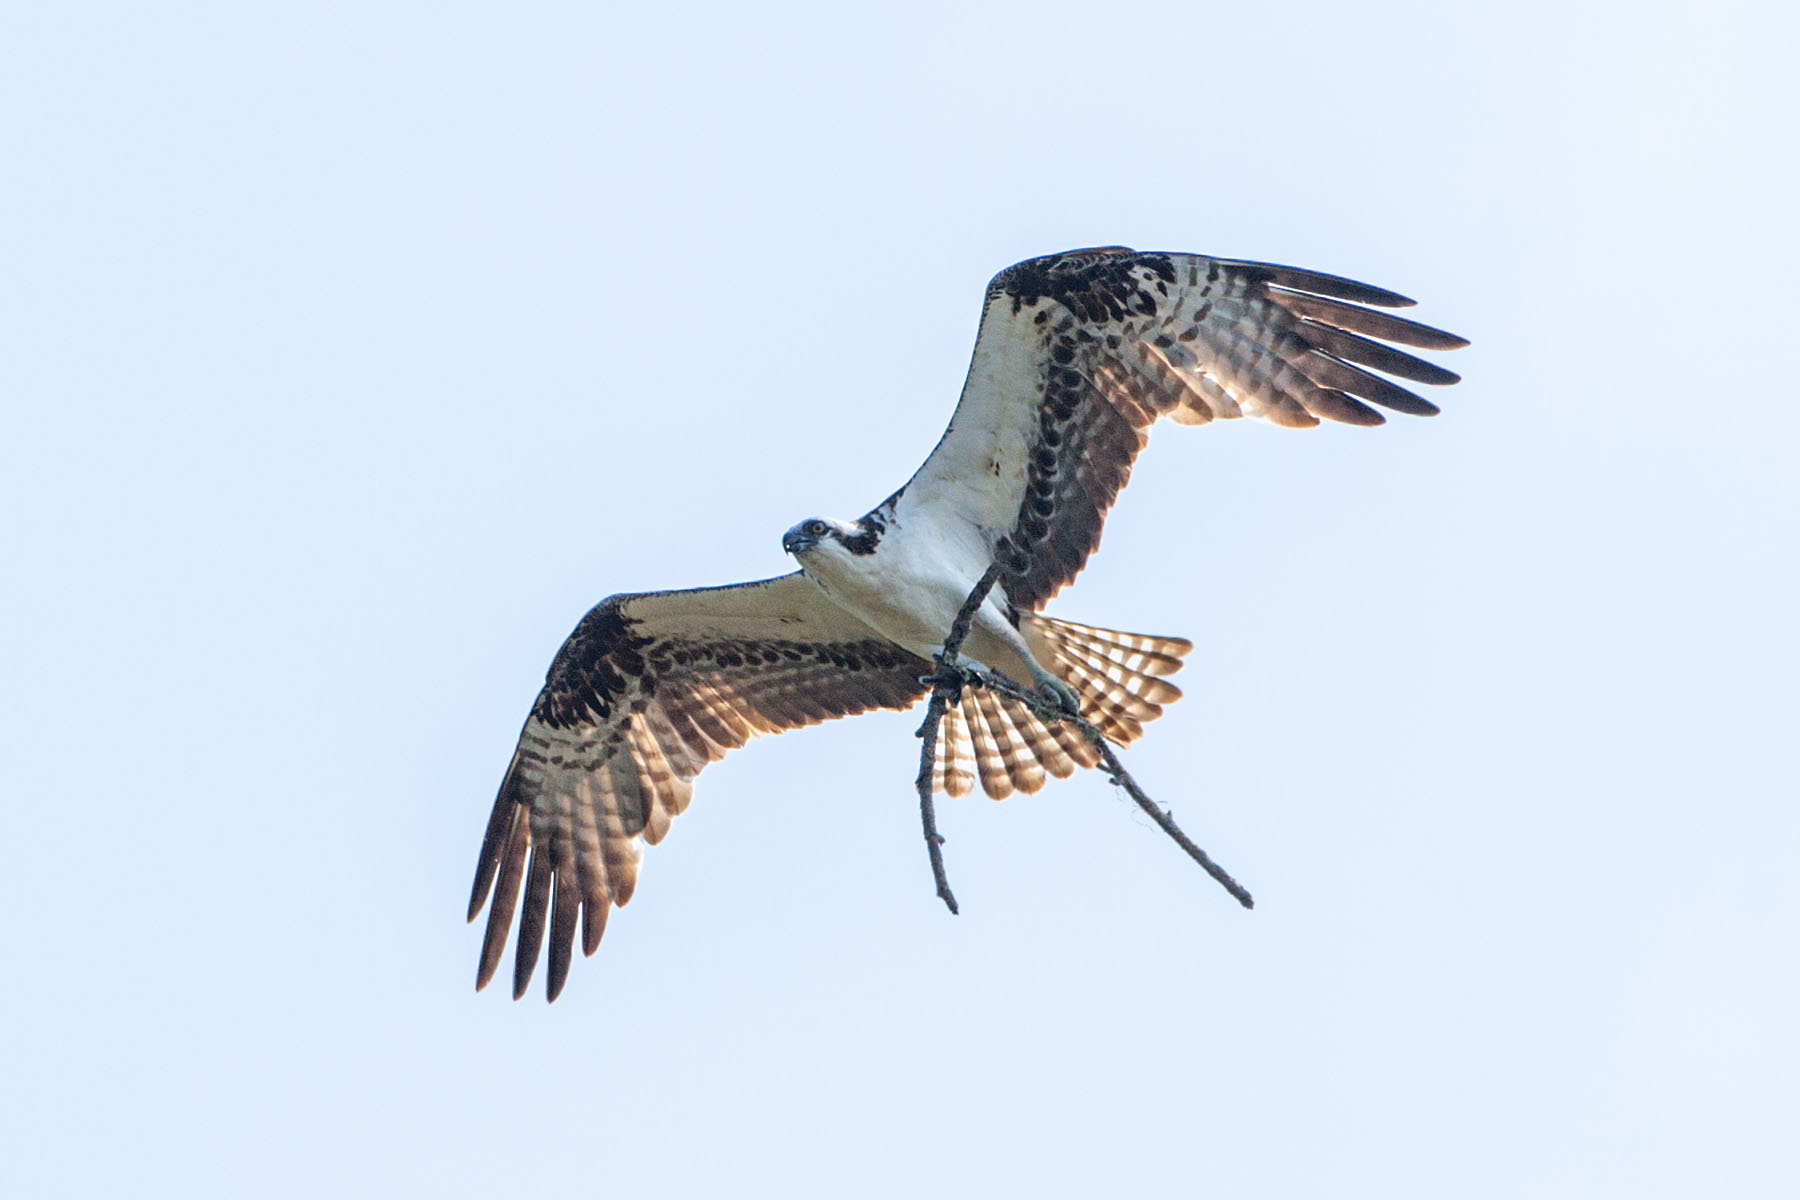 Osprey with a branch, Honeymoon Island State Park, Florida.  Click for next photo.